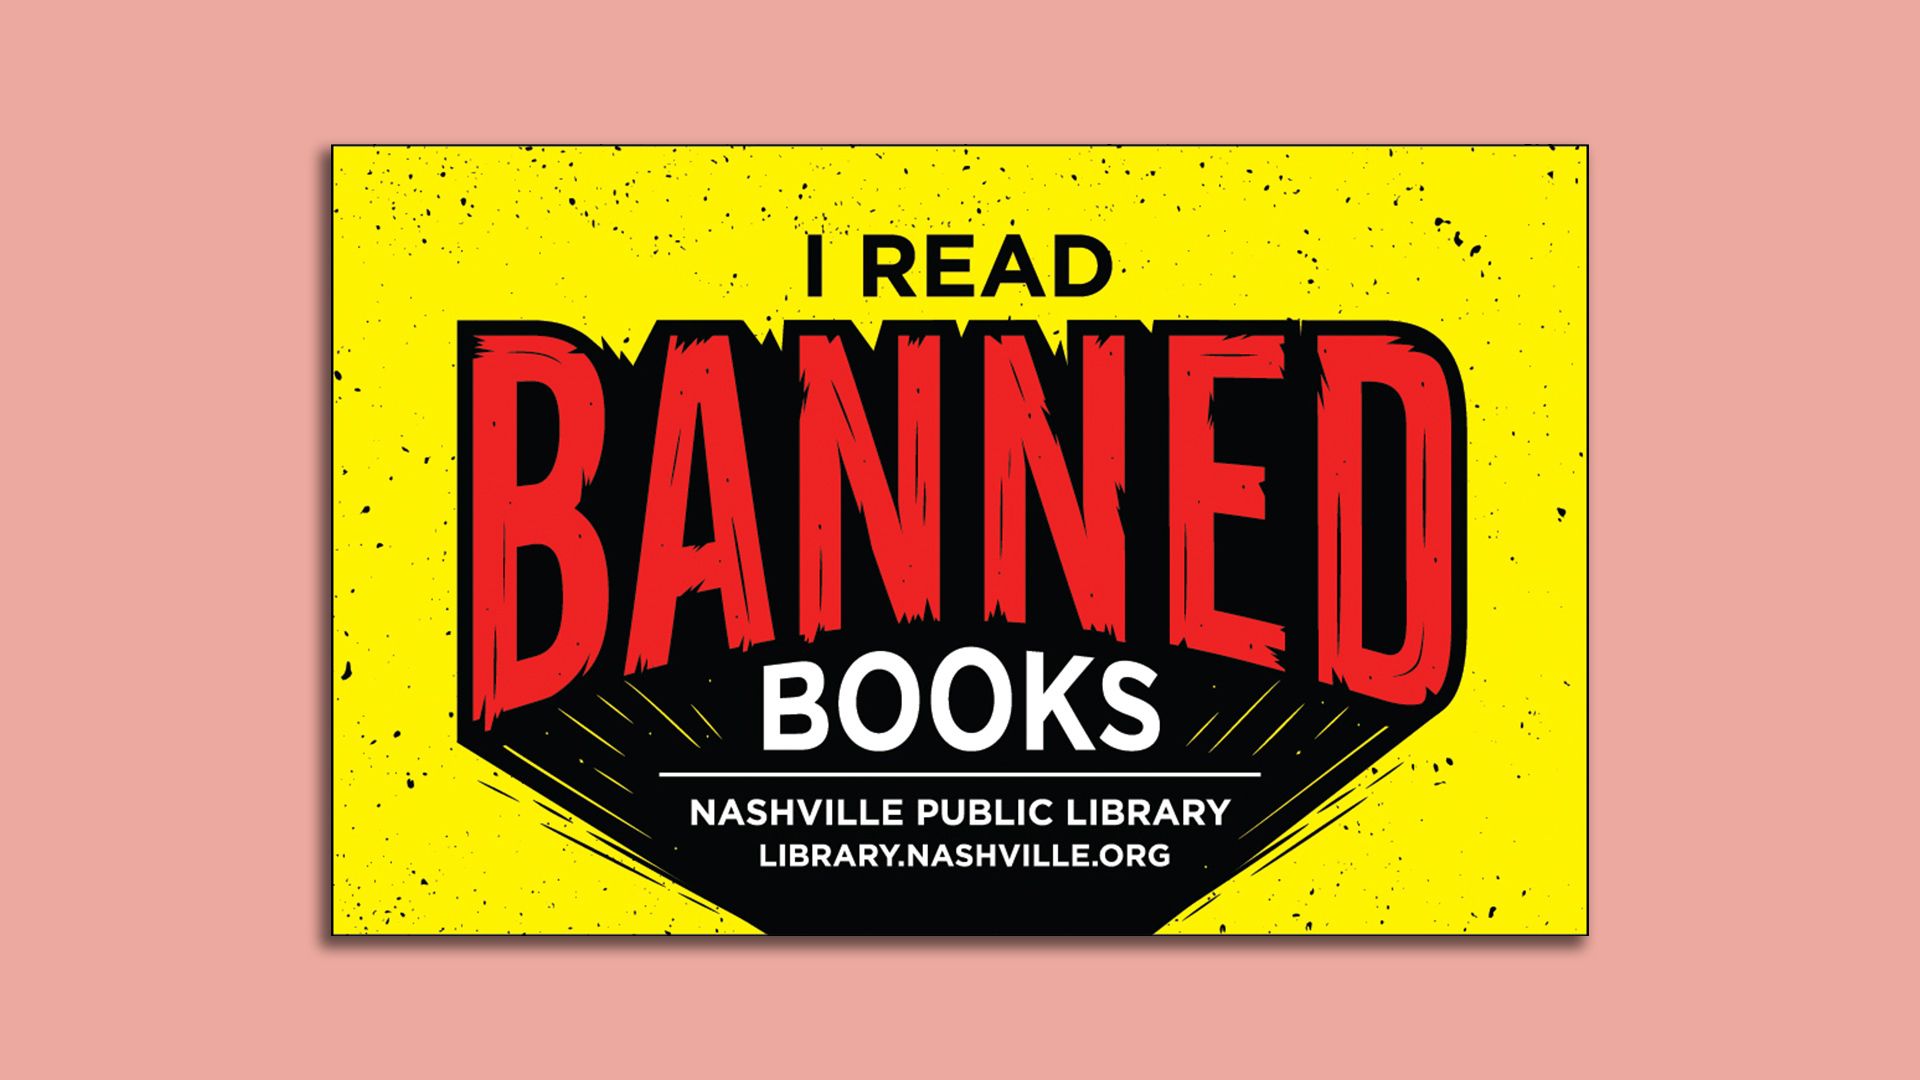 A library card saying "I read banned books."